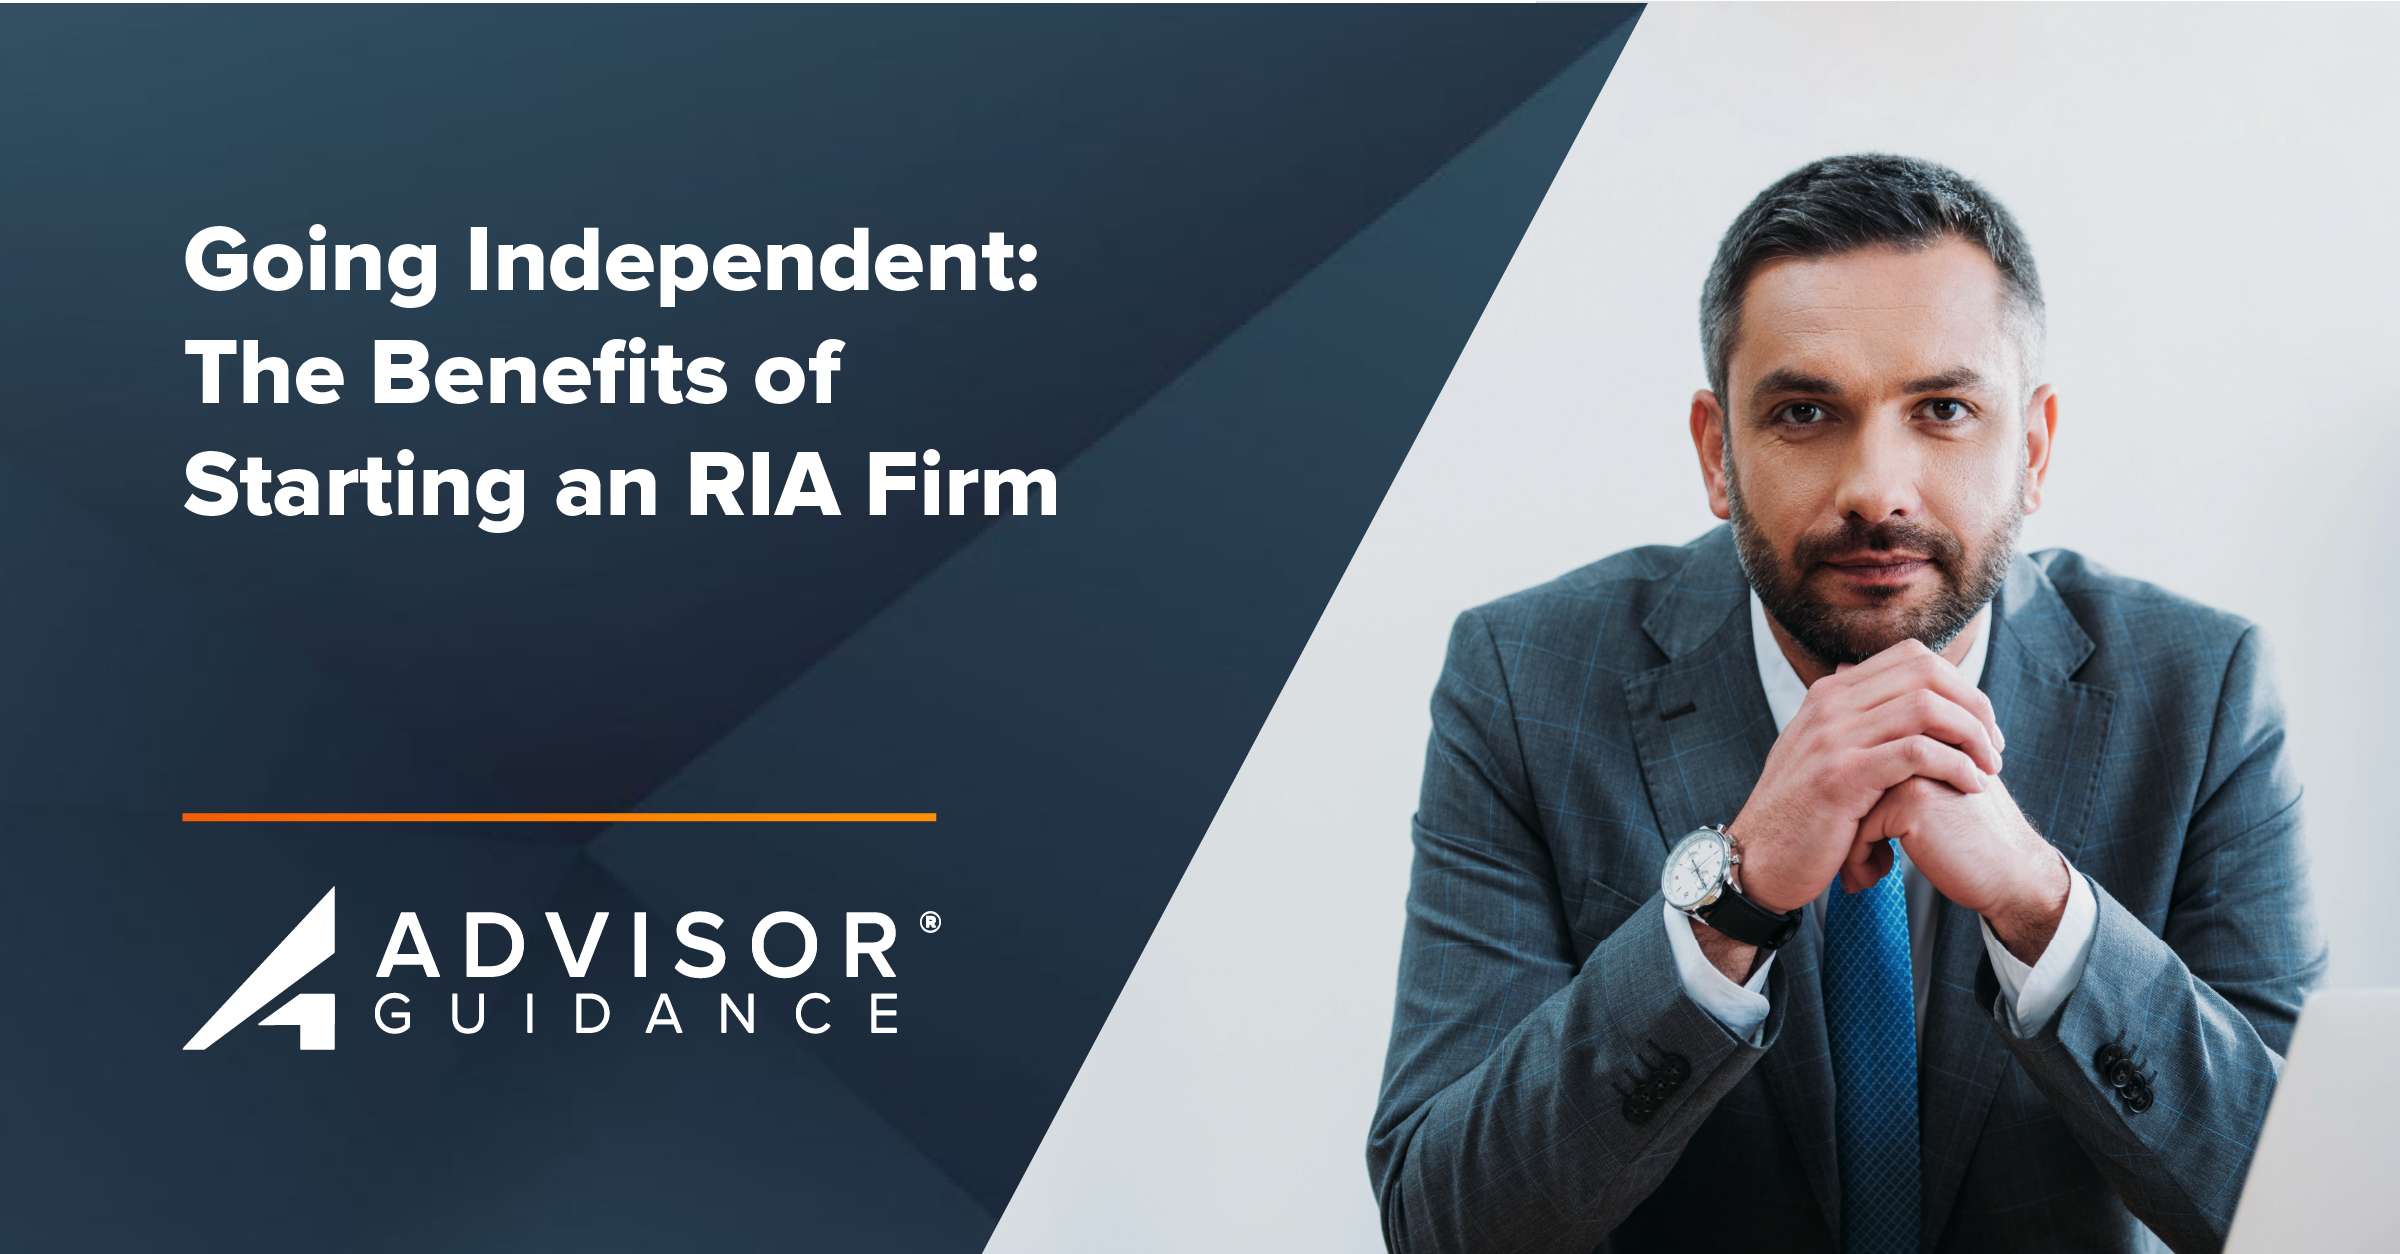 The Benefits of Starting an RIA Firm for Investment Advisors